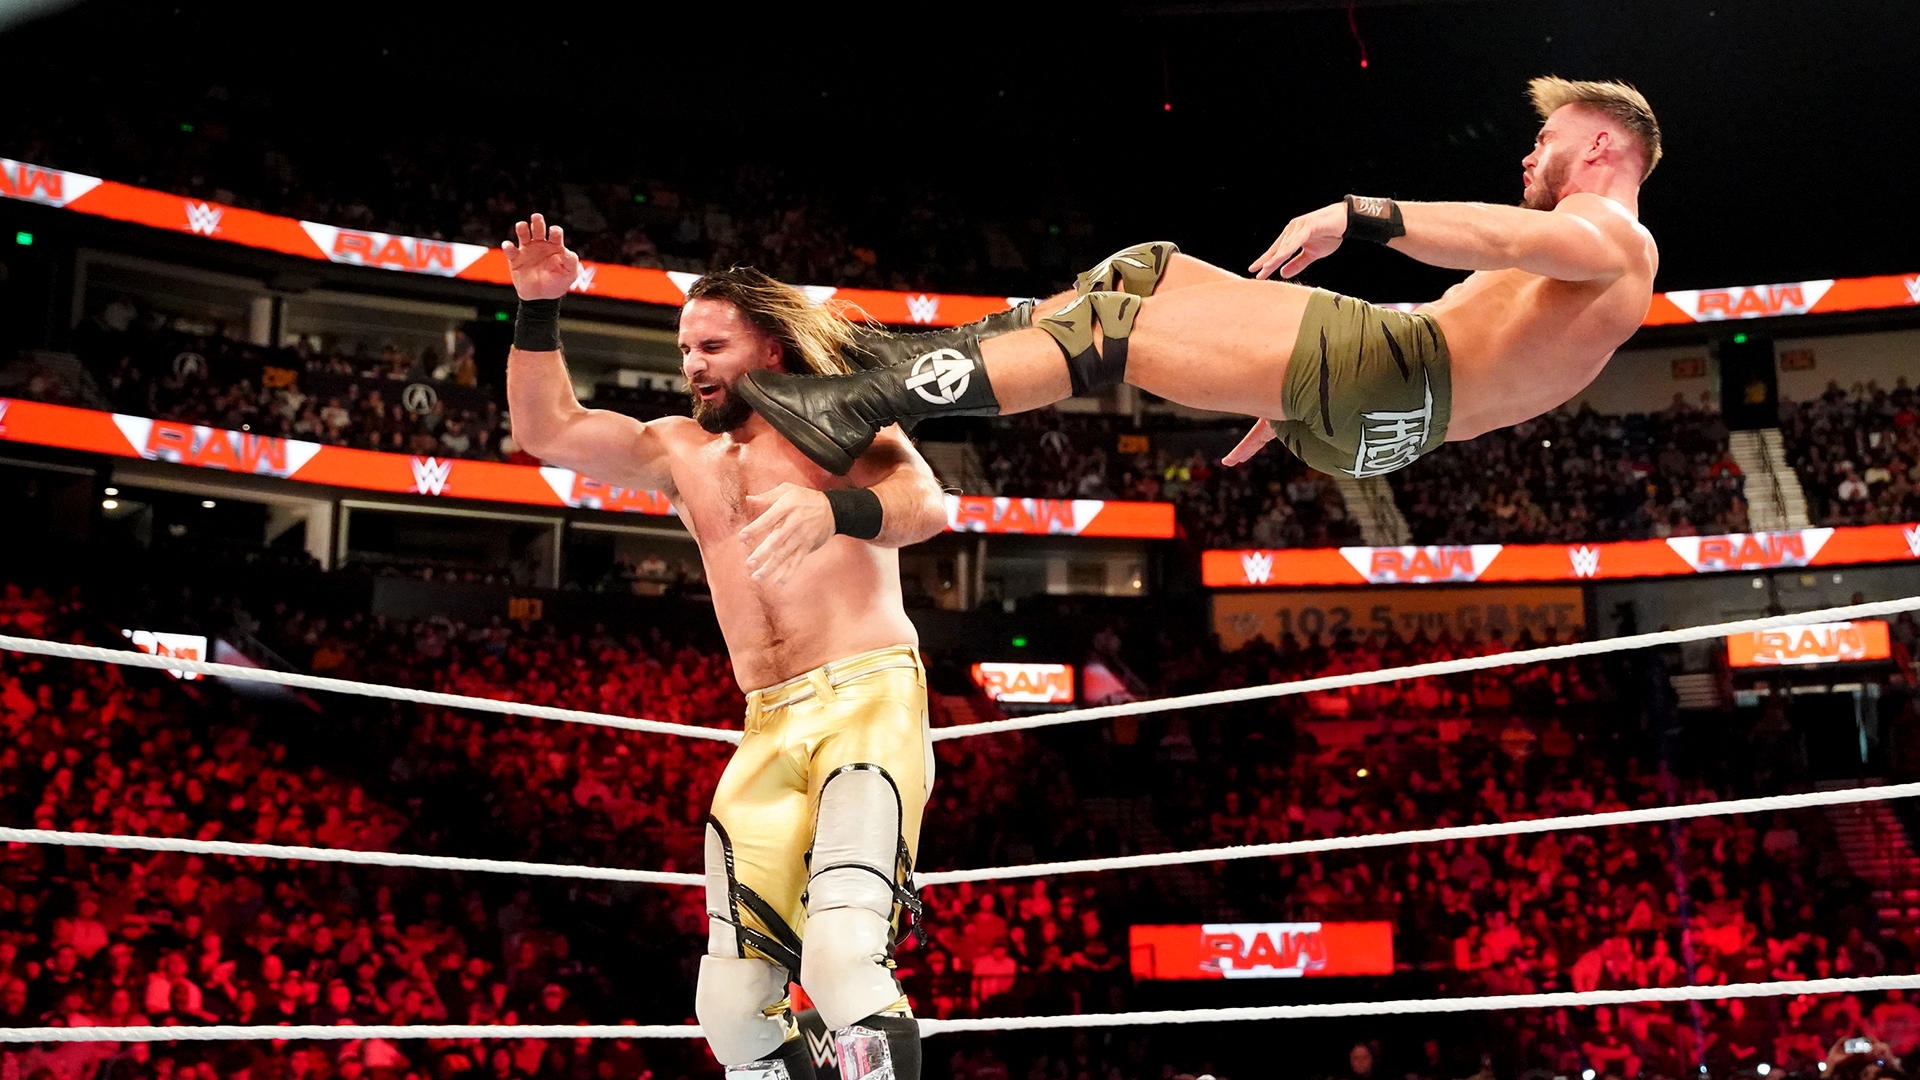 WWE Raw Results 1/2/23 (First show of 2023, Two title matches